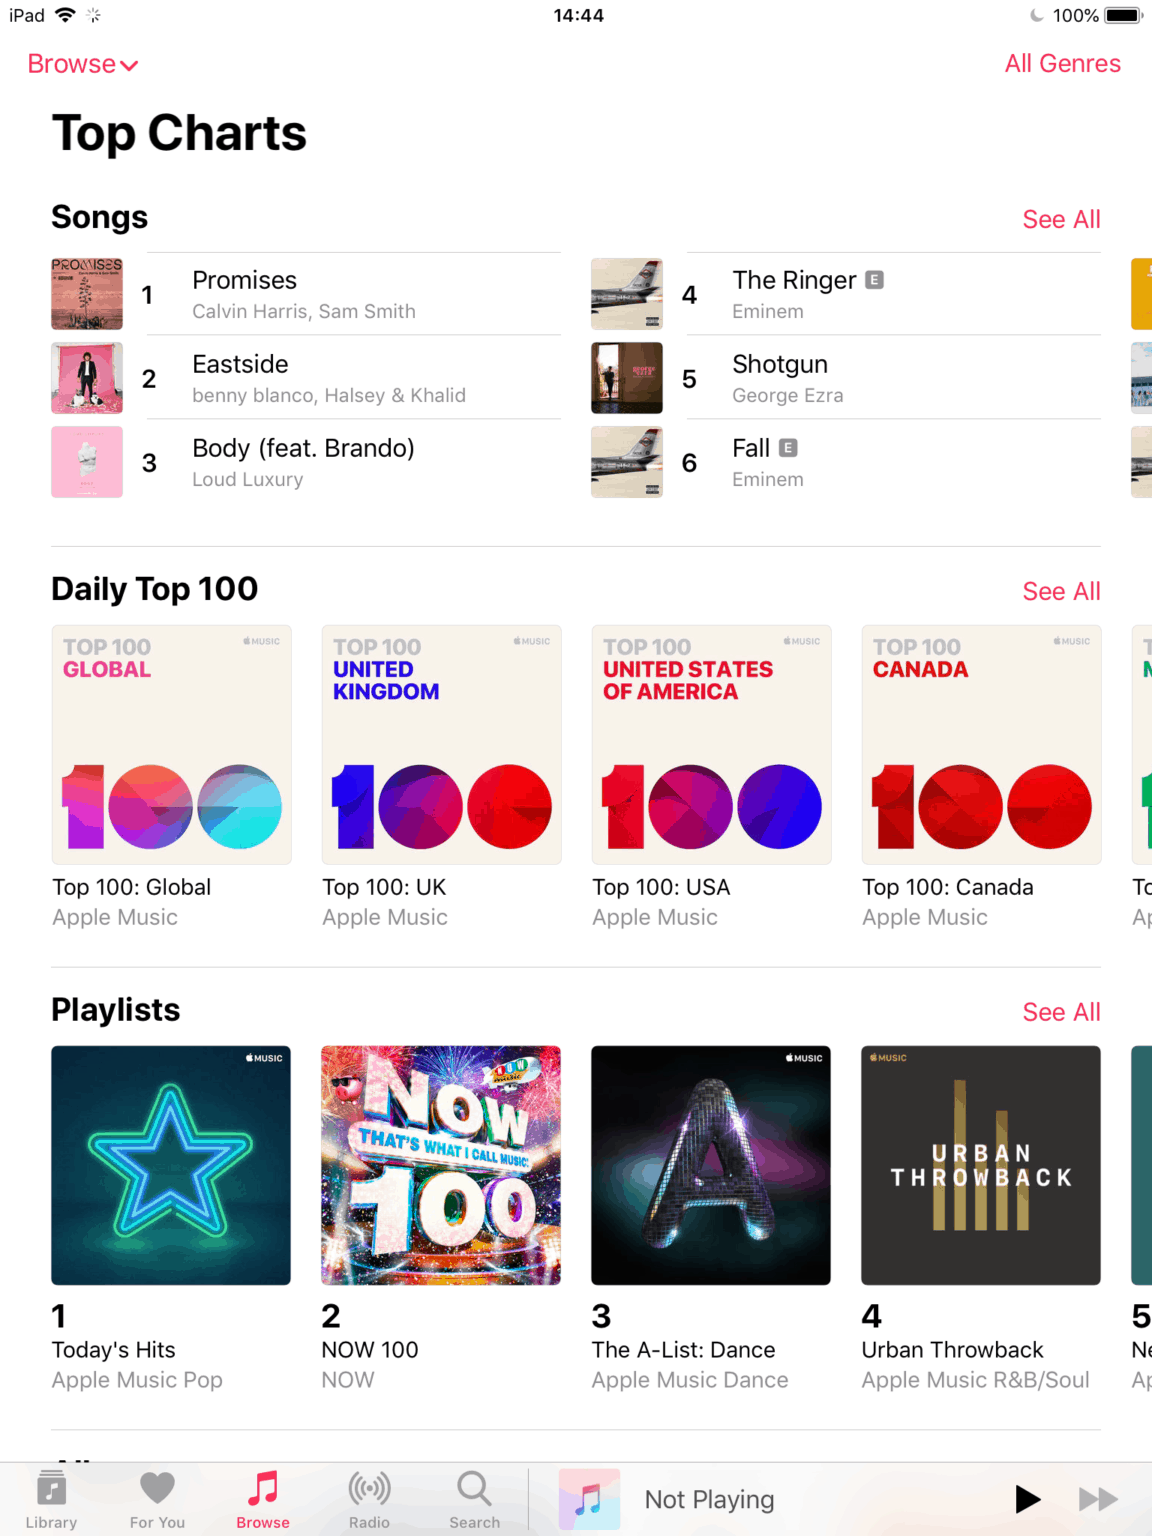 Apple Music rolls out Top 100 Charts High Resolution Audio